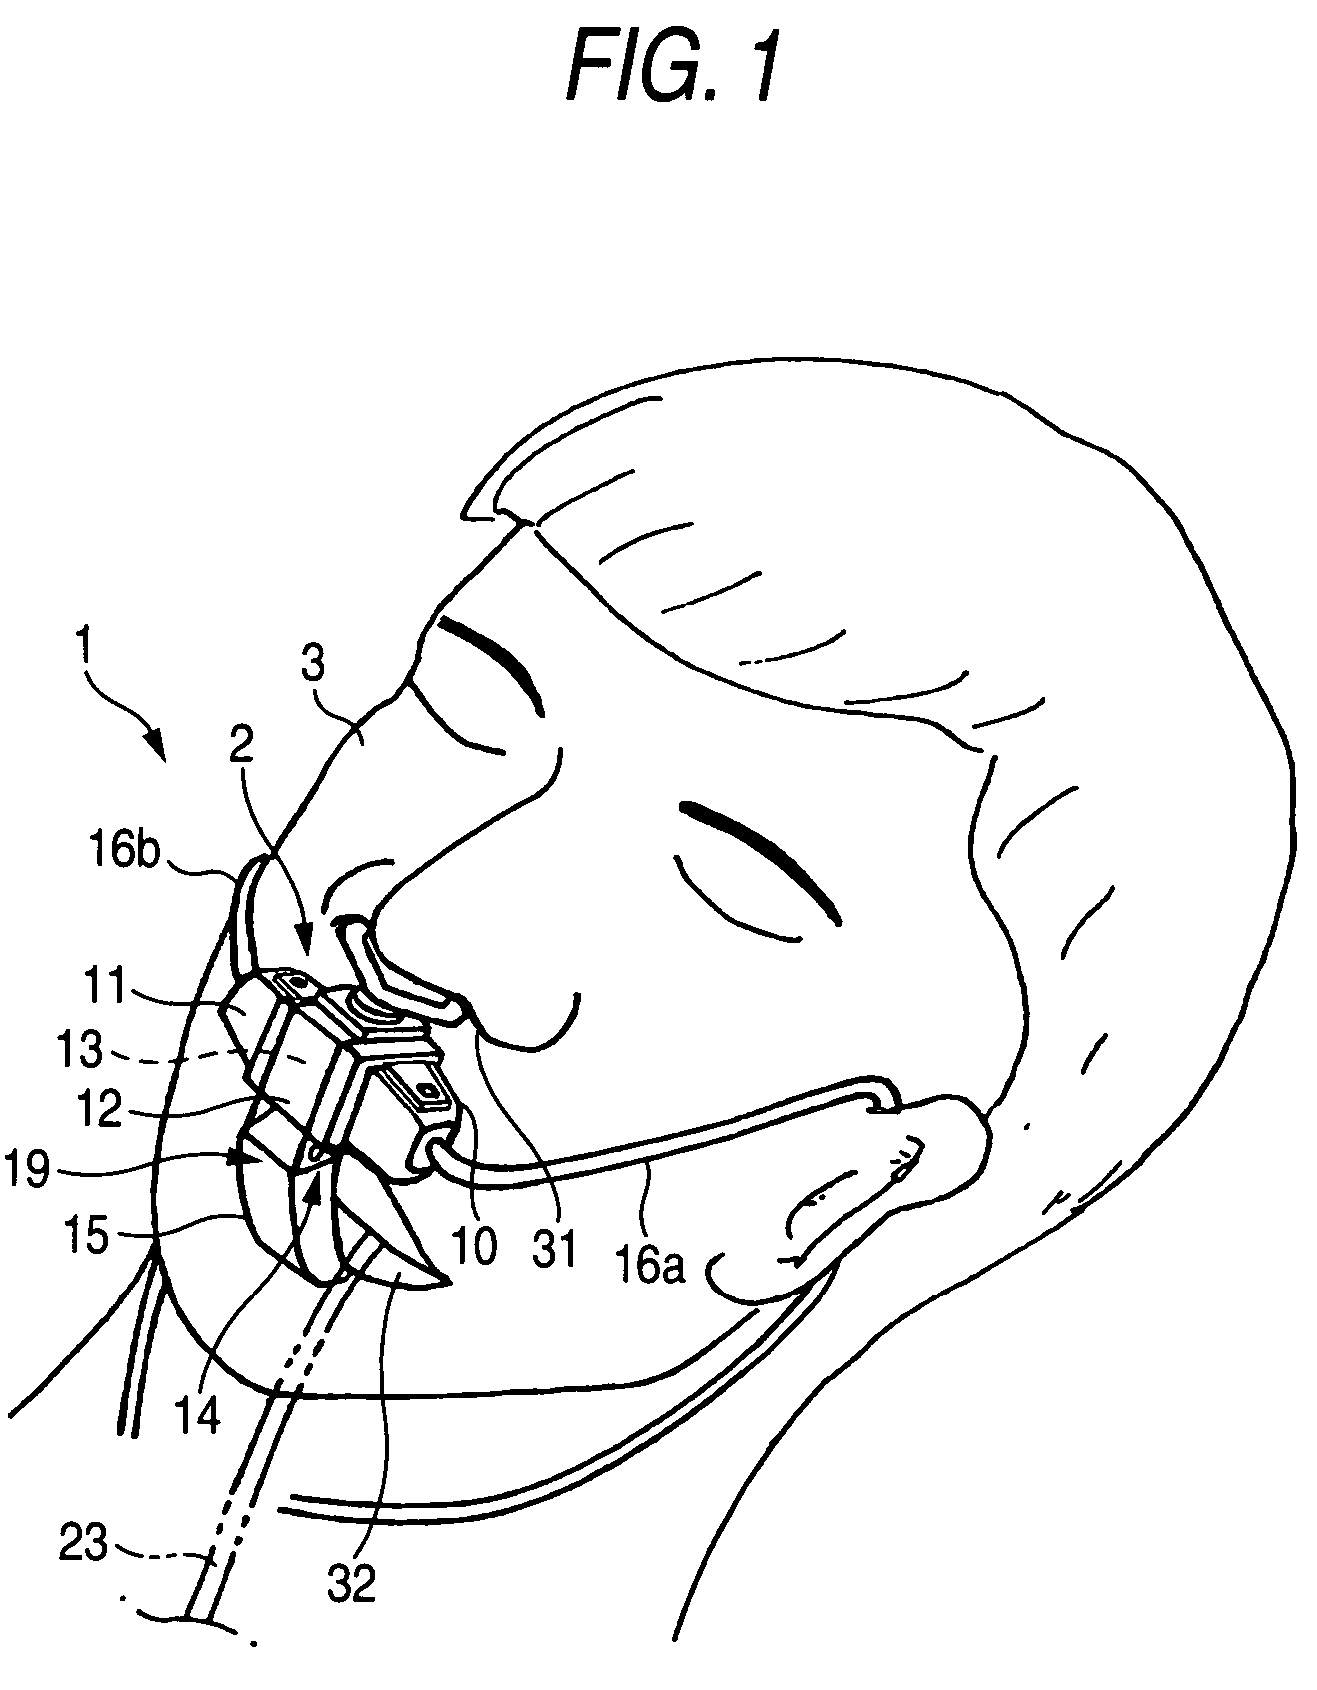 Carbon dioxide sensor and airway adapter incorporated in the same